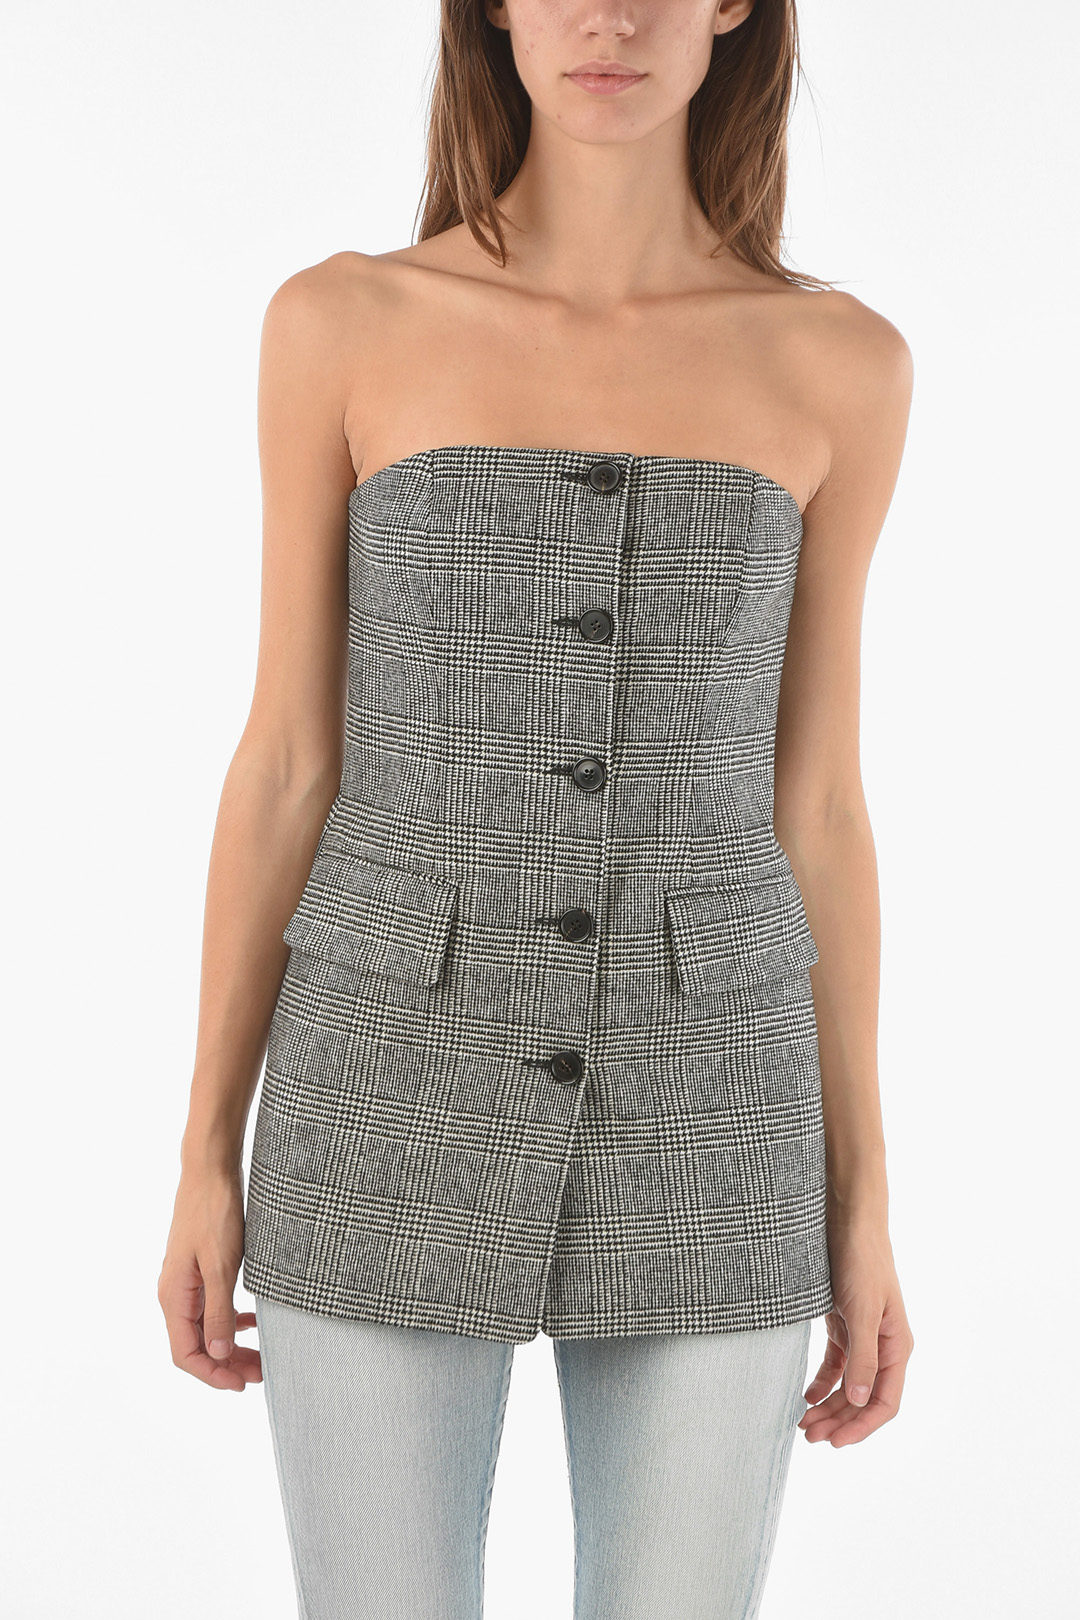 Michael Kors Flanel Tailored Strapless Top with Glen Check Pattern